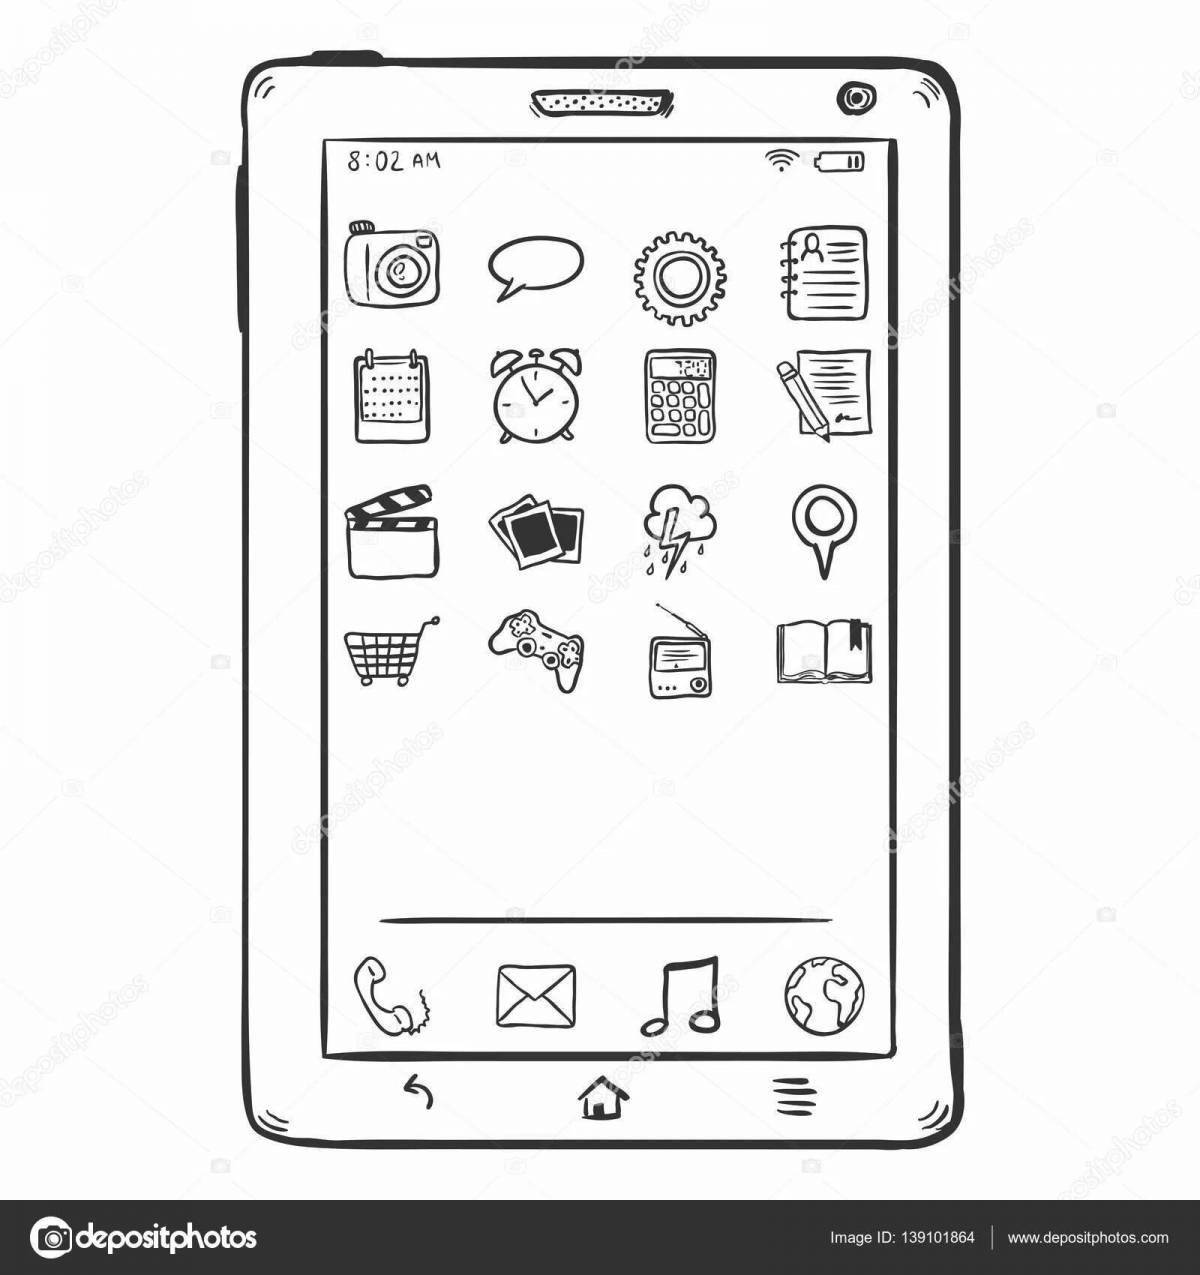 Creative coloring page app on phone